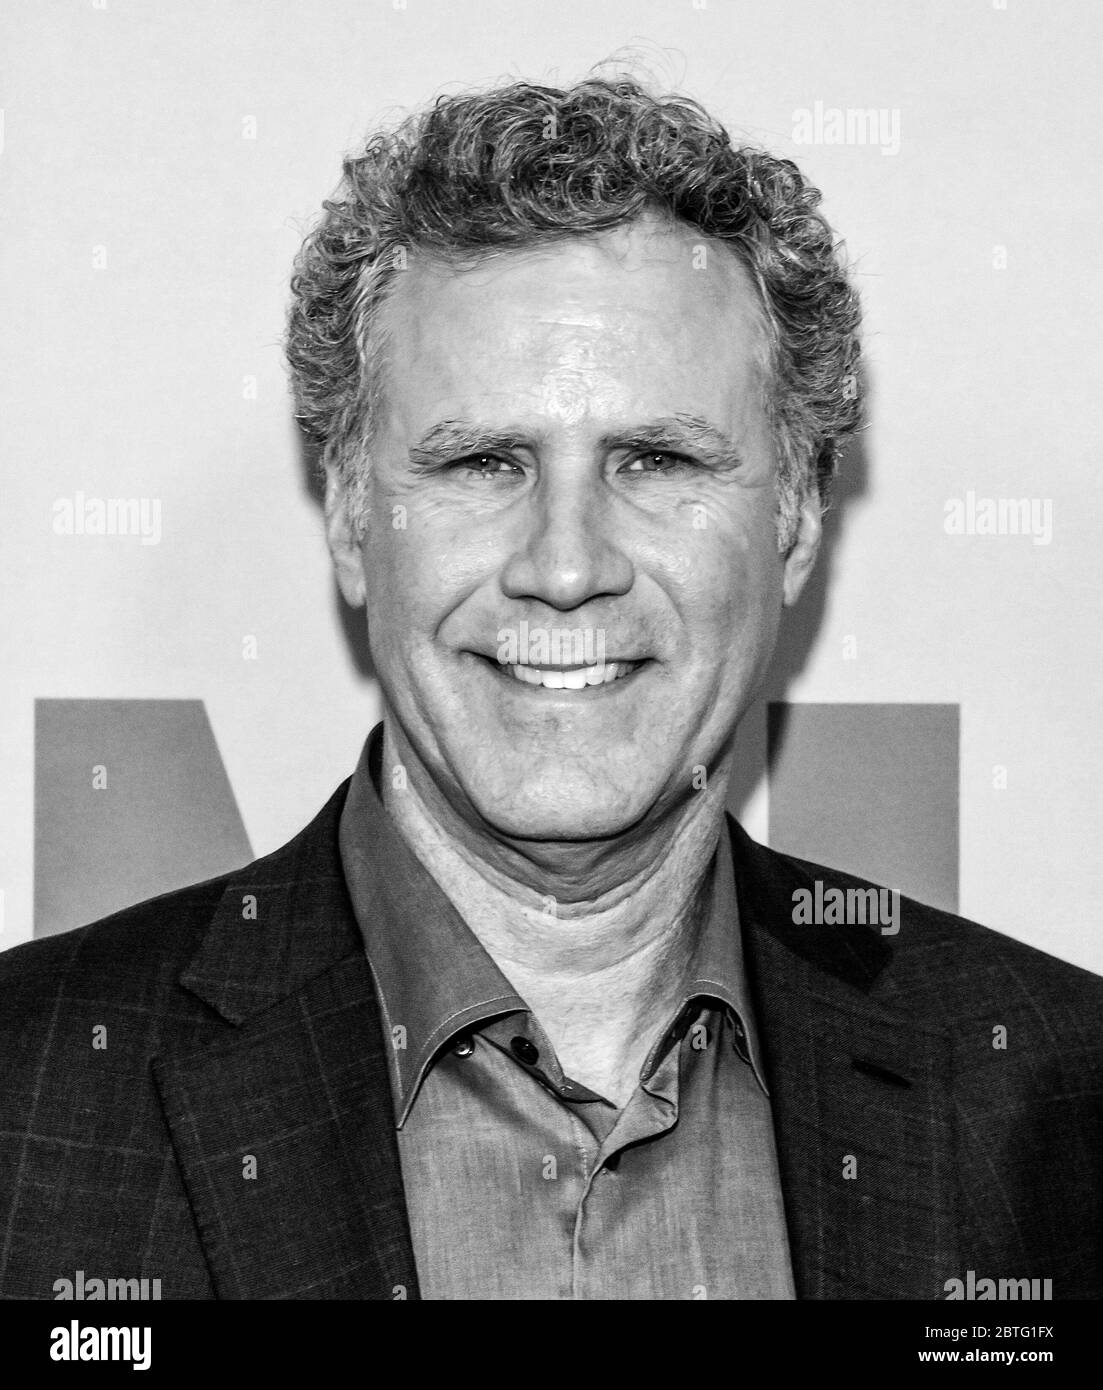 New York, NY - Feb 12, 2020: Will Ferrell attends the premiere of "Downhill" at SVA Theater. Stock Photo